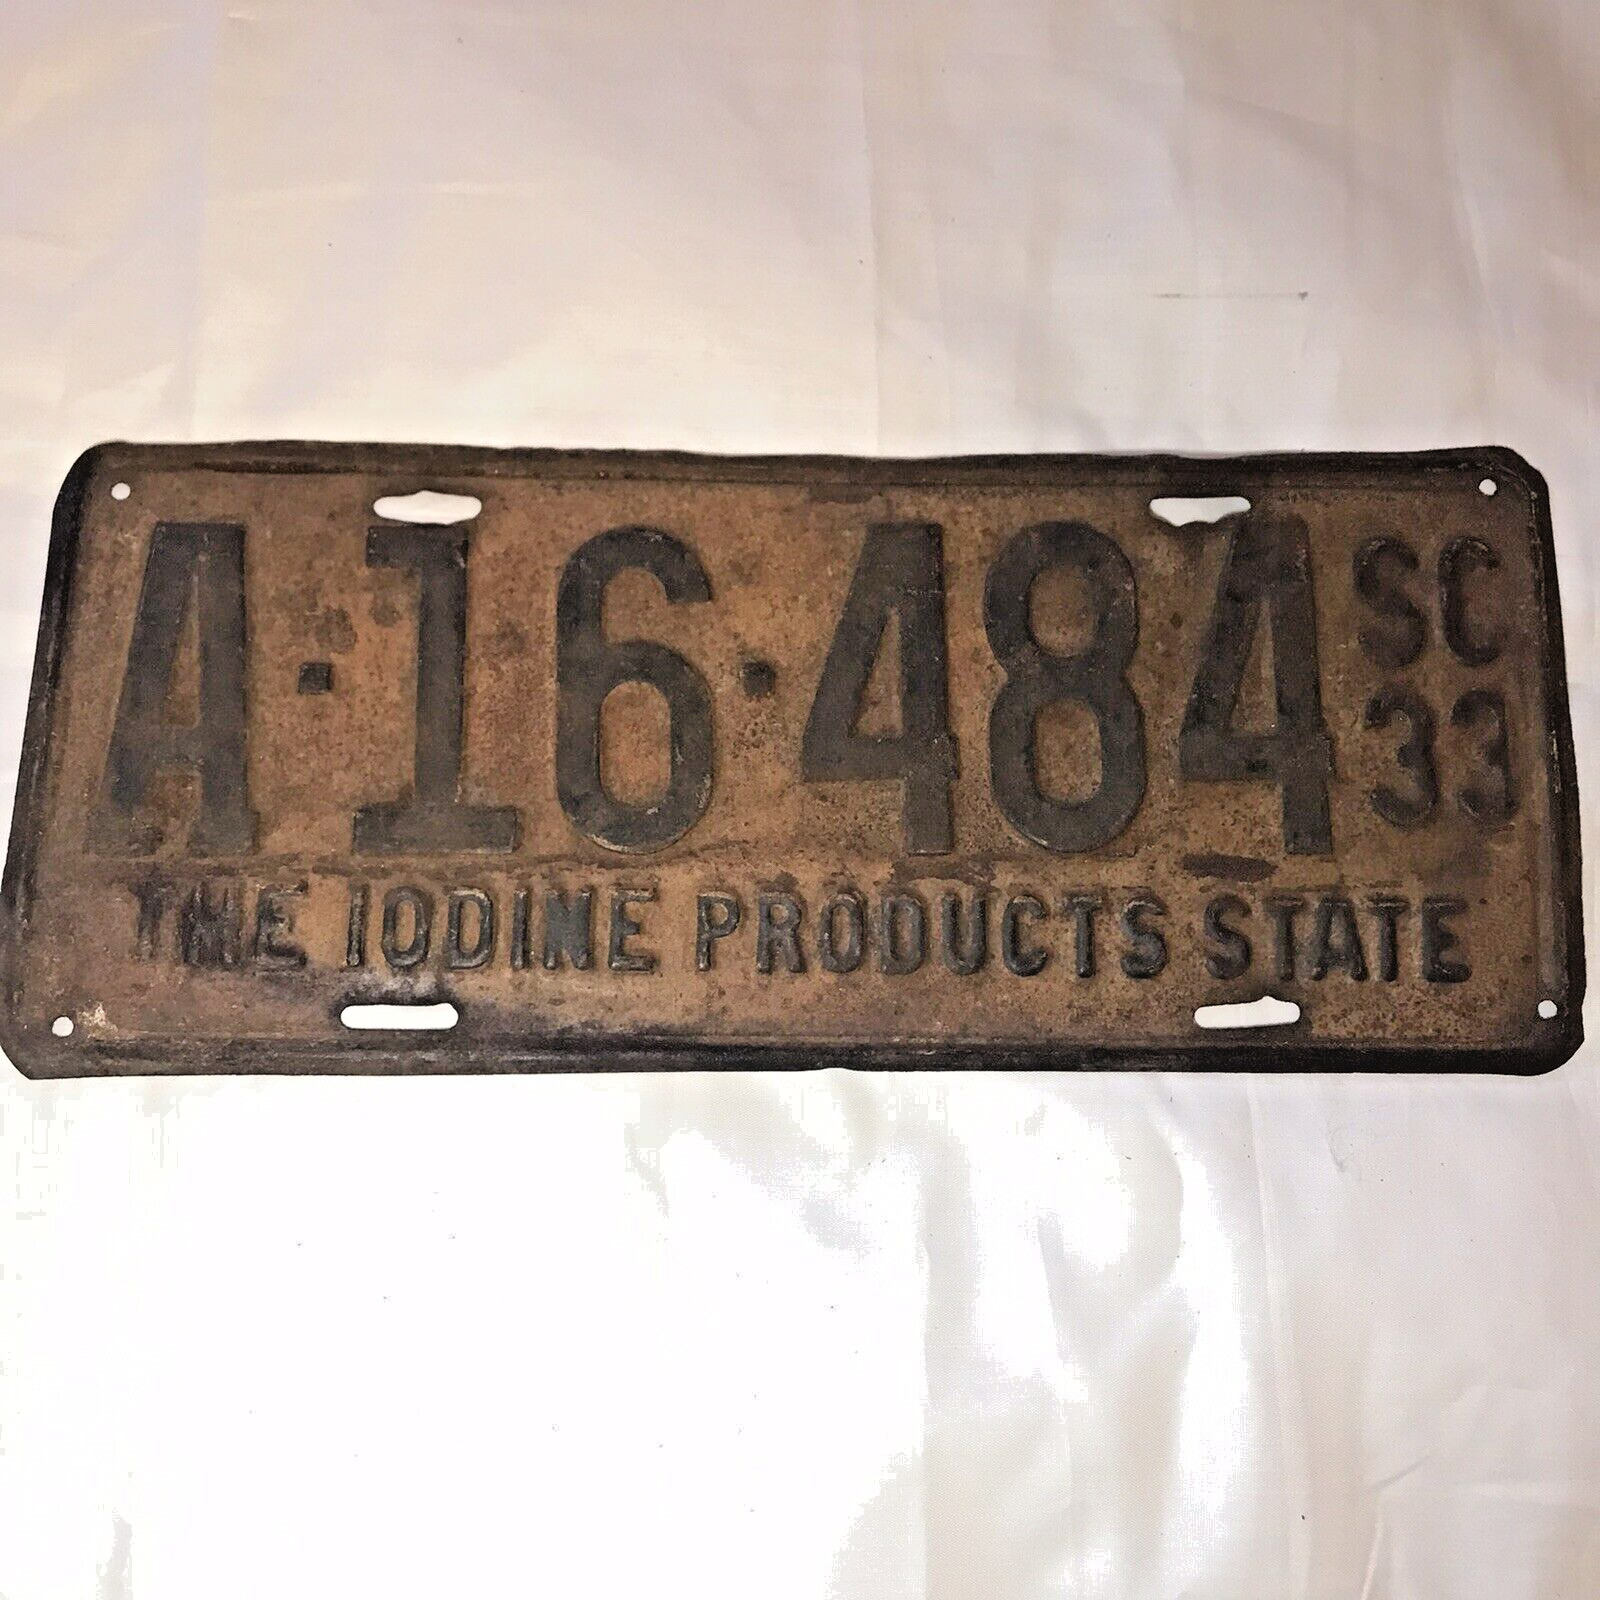 License Plate Tag 1933 The Iodine Products State South Caroline SC Rusty Rustic